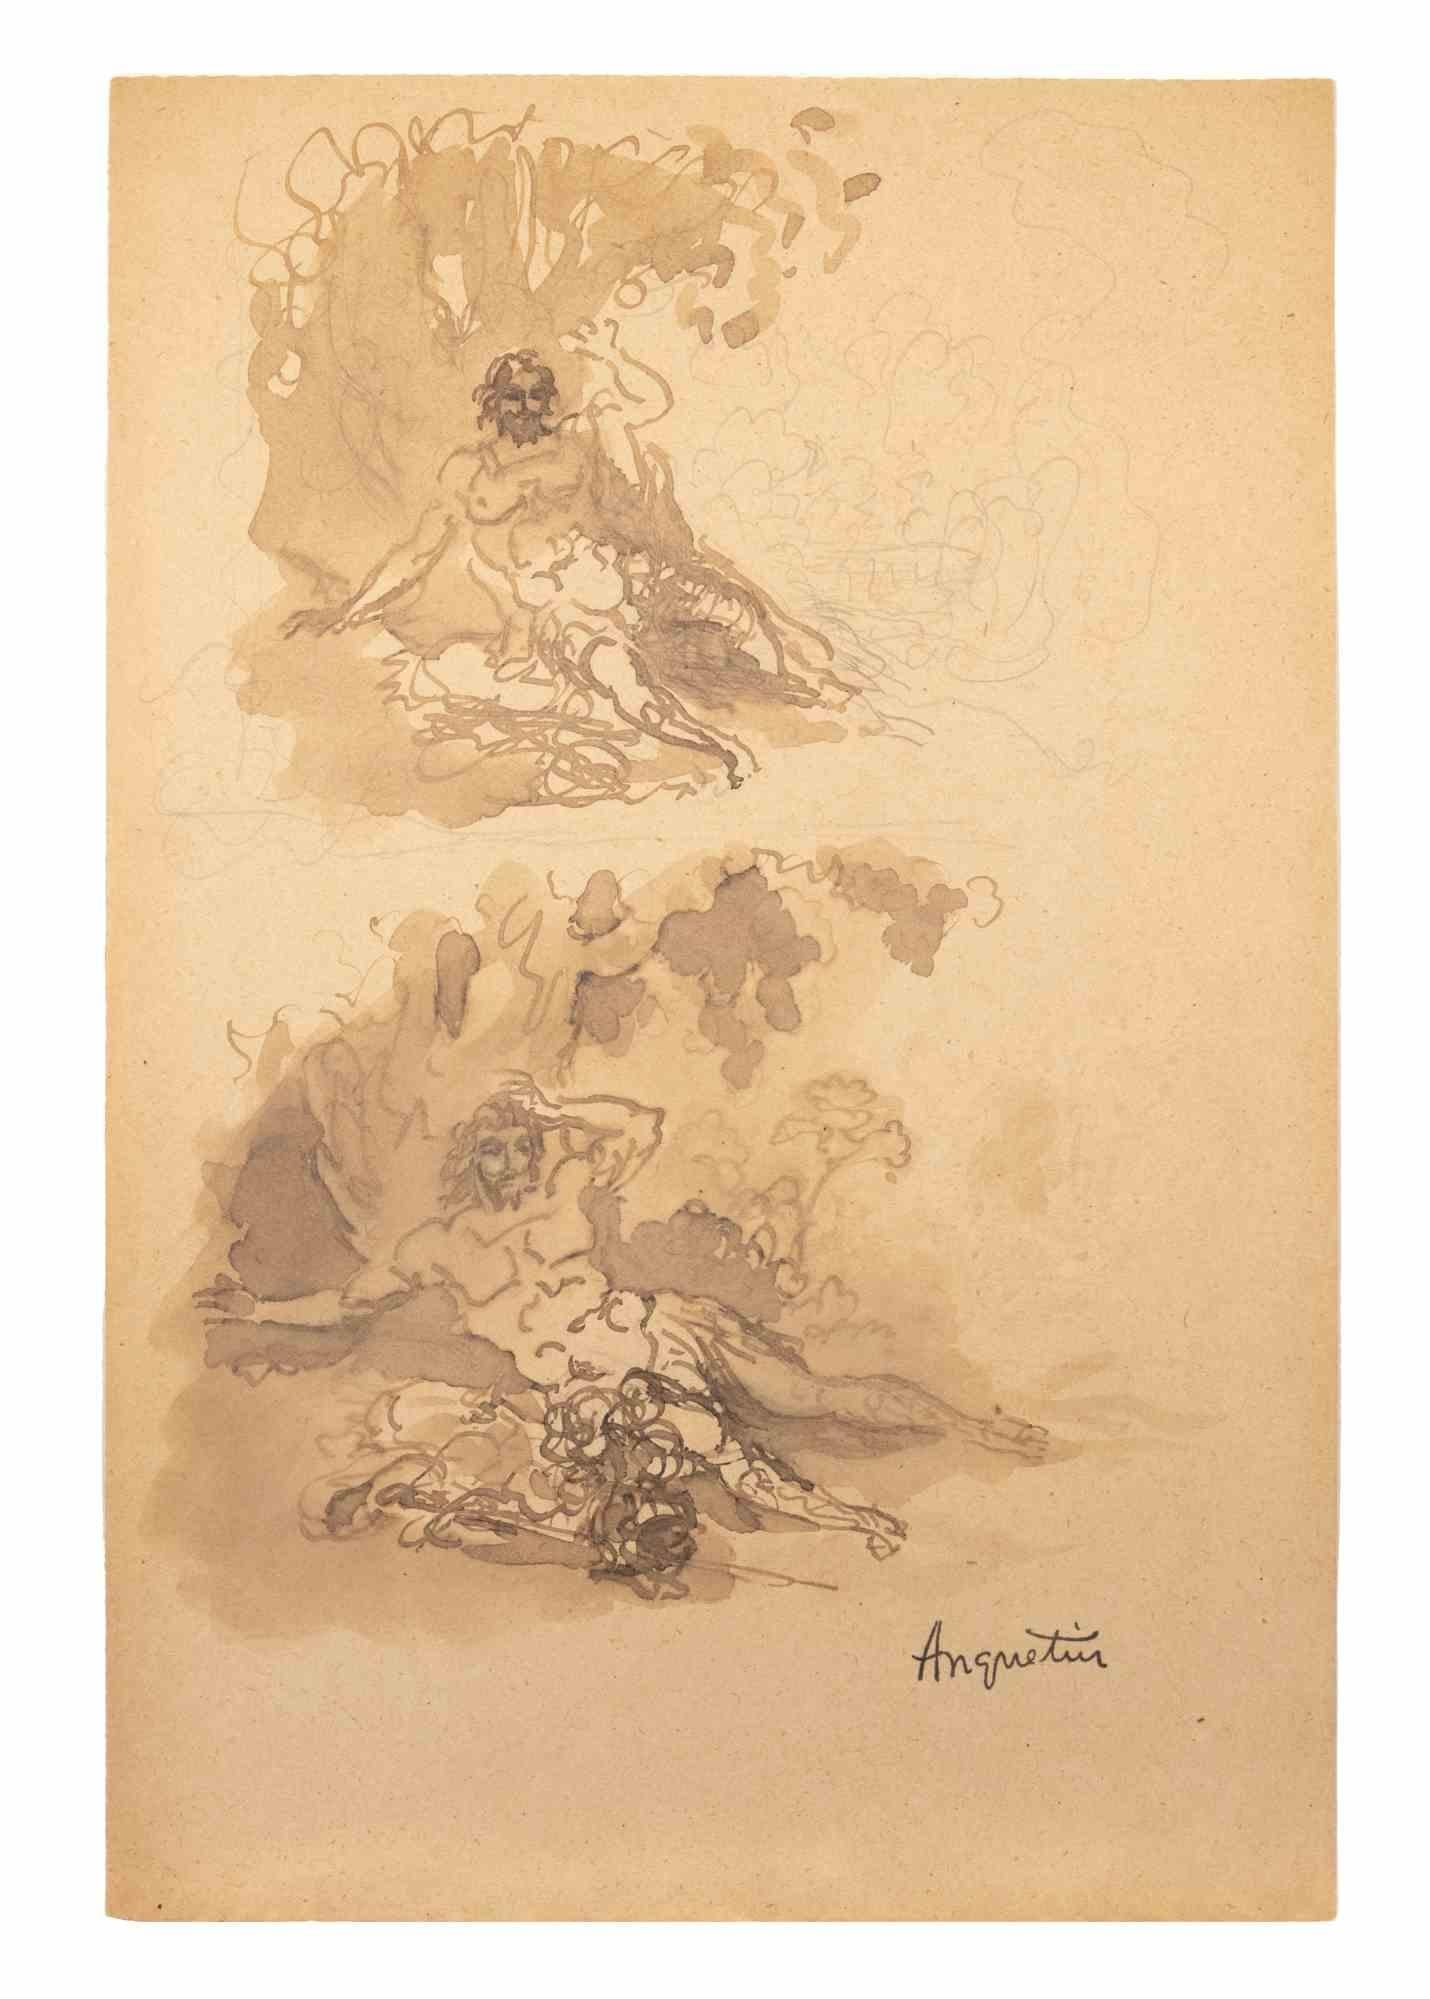 Nudes is an ink and pencil drawing on paper realized in the early 20th Century by Louis Anquetin (1861-1932).

Hand-signed on the lower.

Good condition.

Louis Émile Anquetin (26 January 1861 – 19 August 1932) was a French painter. In 1882 he came